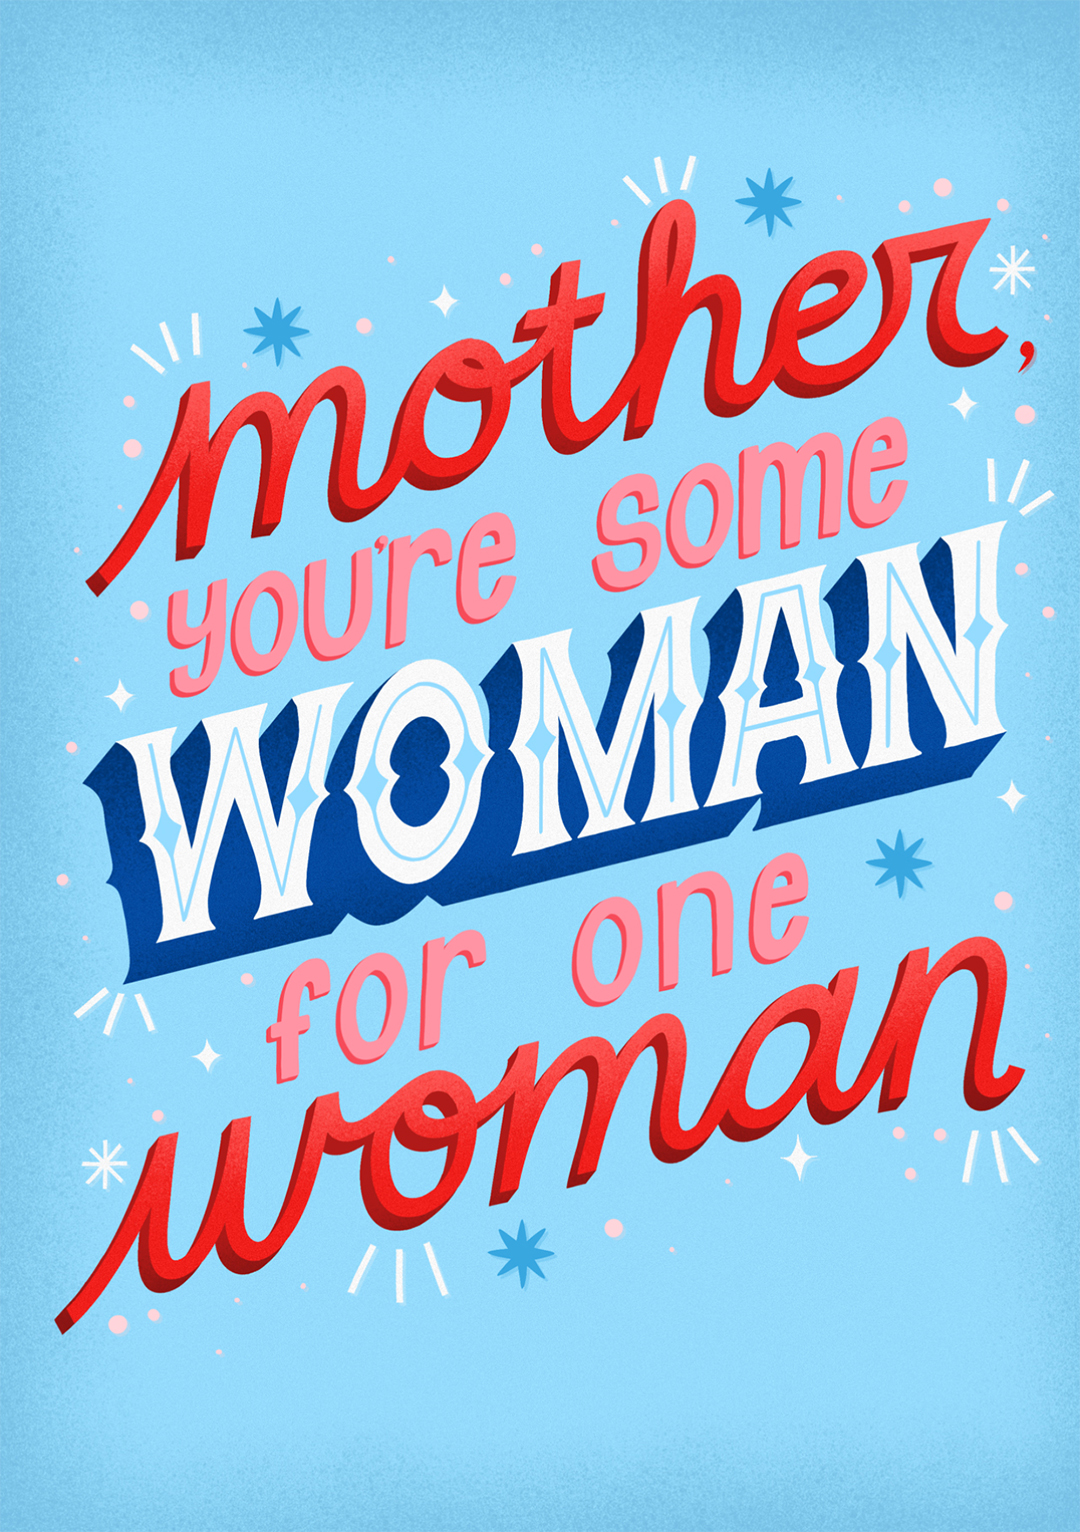 Some Woman (by Claire Schorman)Mother's Card